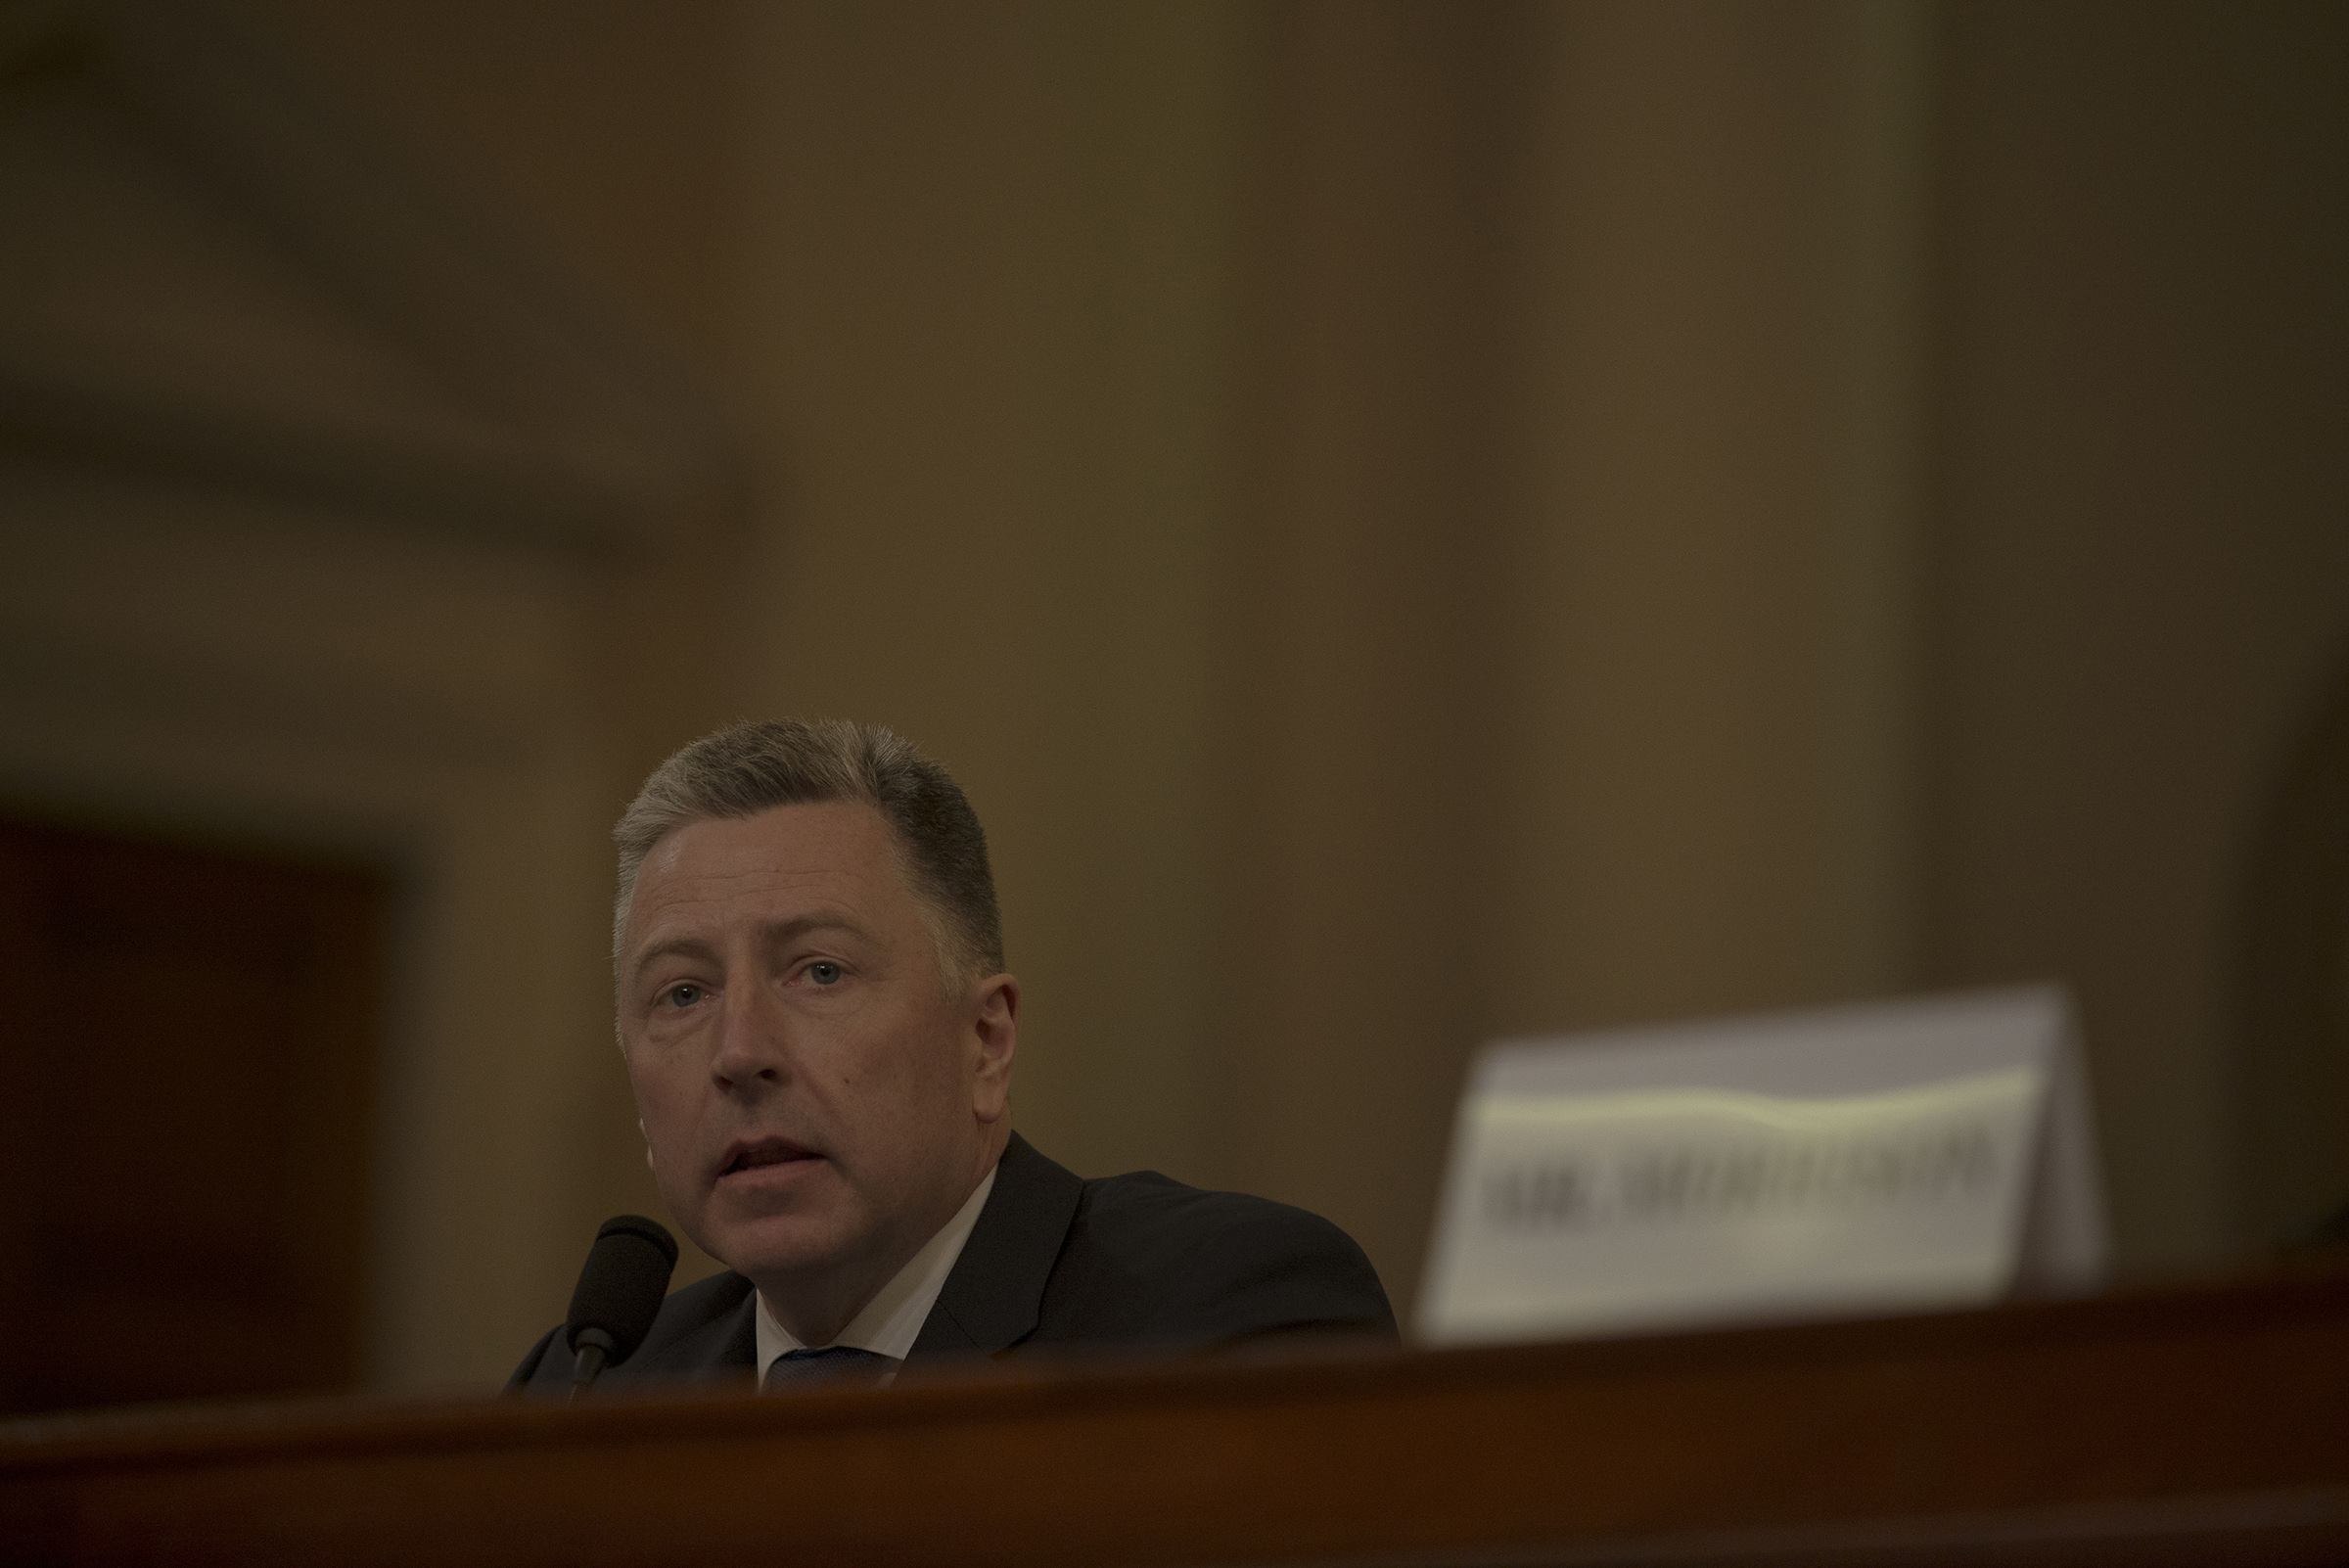 Ambassador Kurt Volker testifies during the House Intelligence Committee hearing on the impeachment inquiry on Capitol Hill in Washington, D.C. on Nov. 19, 2019. (Gabriella Demczuk for TIME)